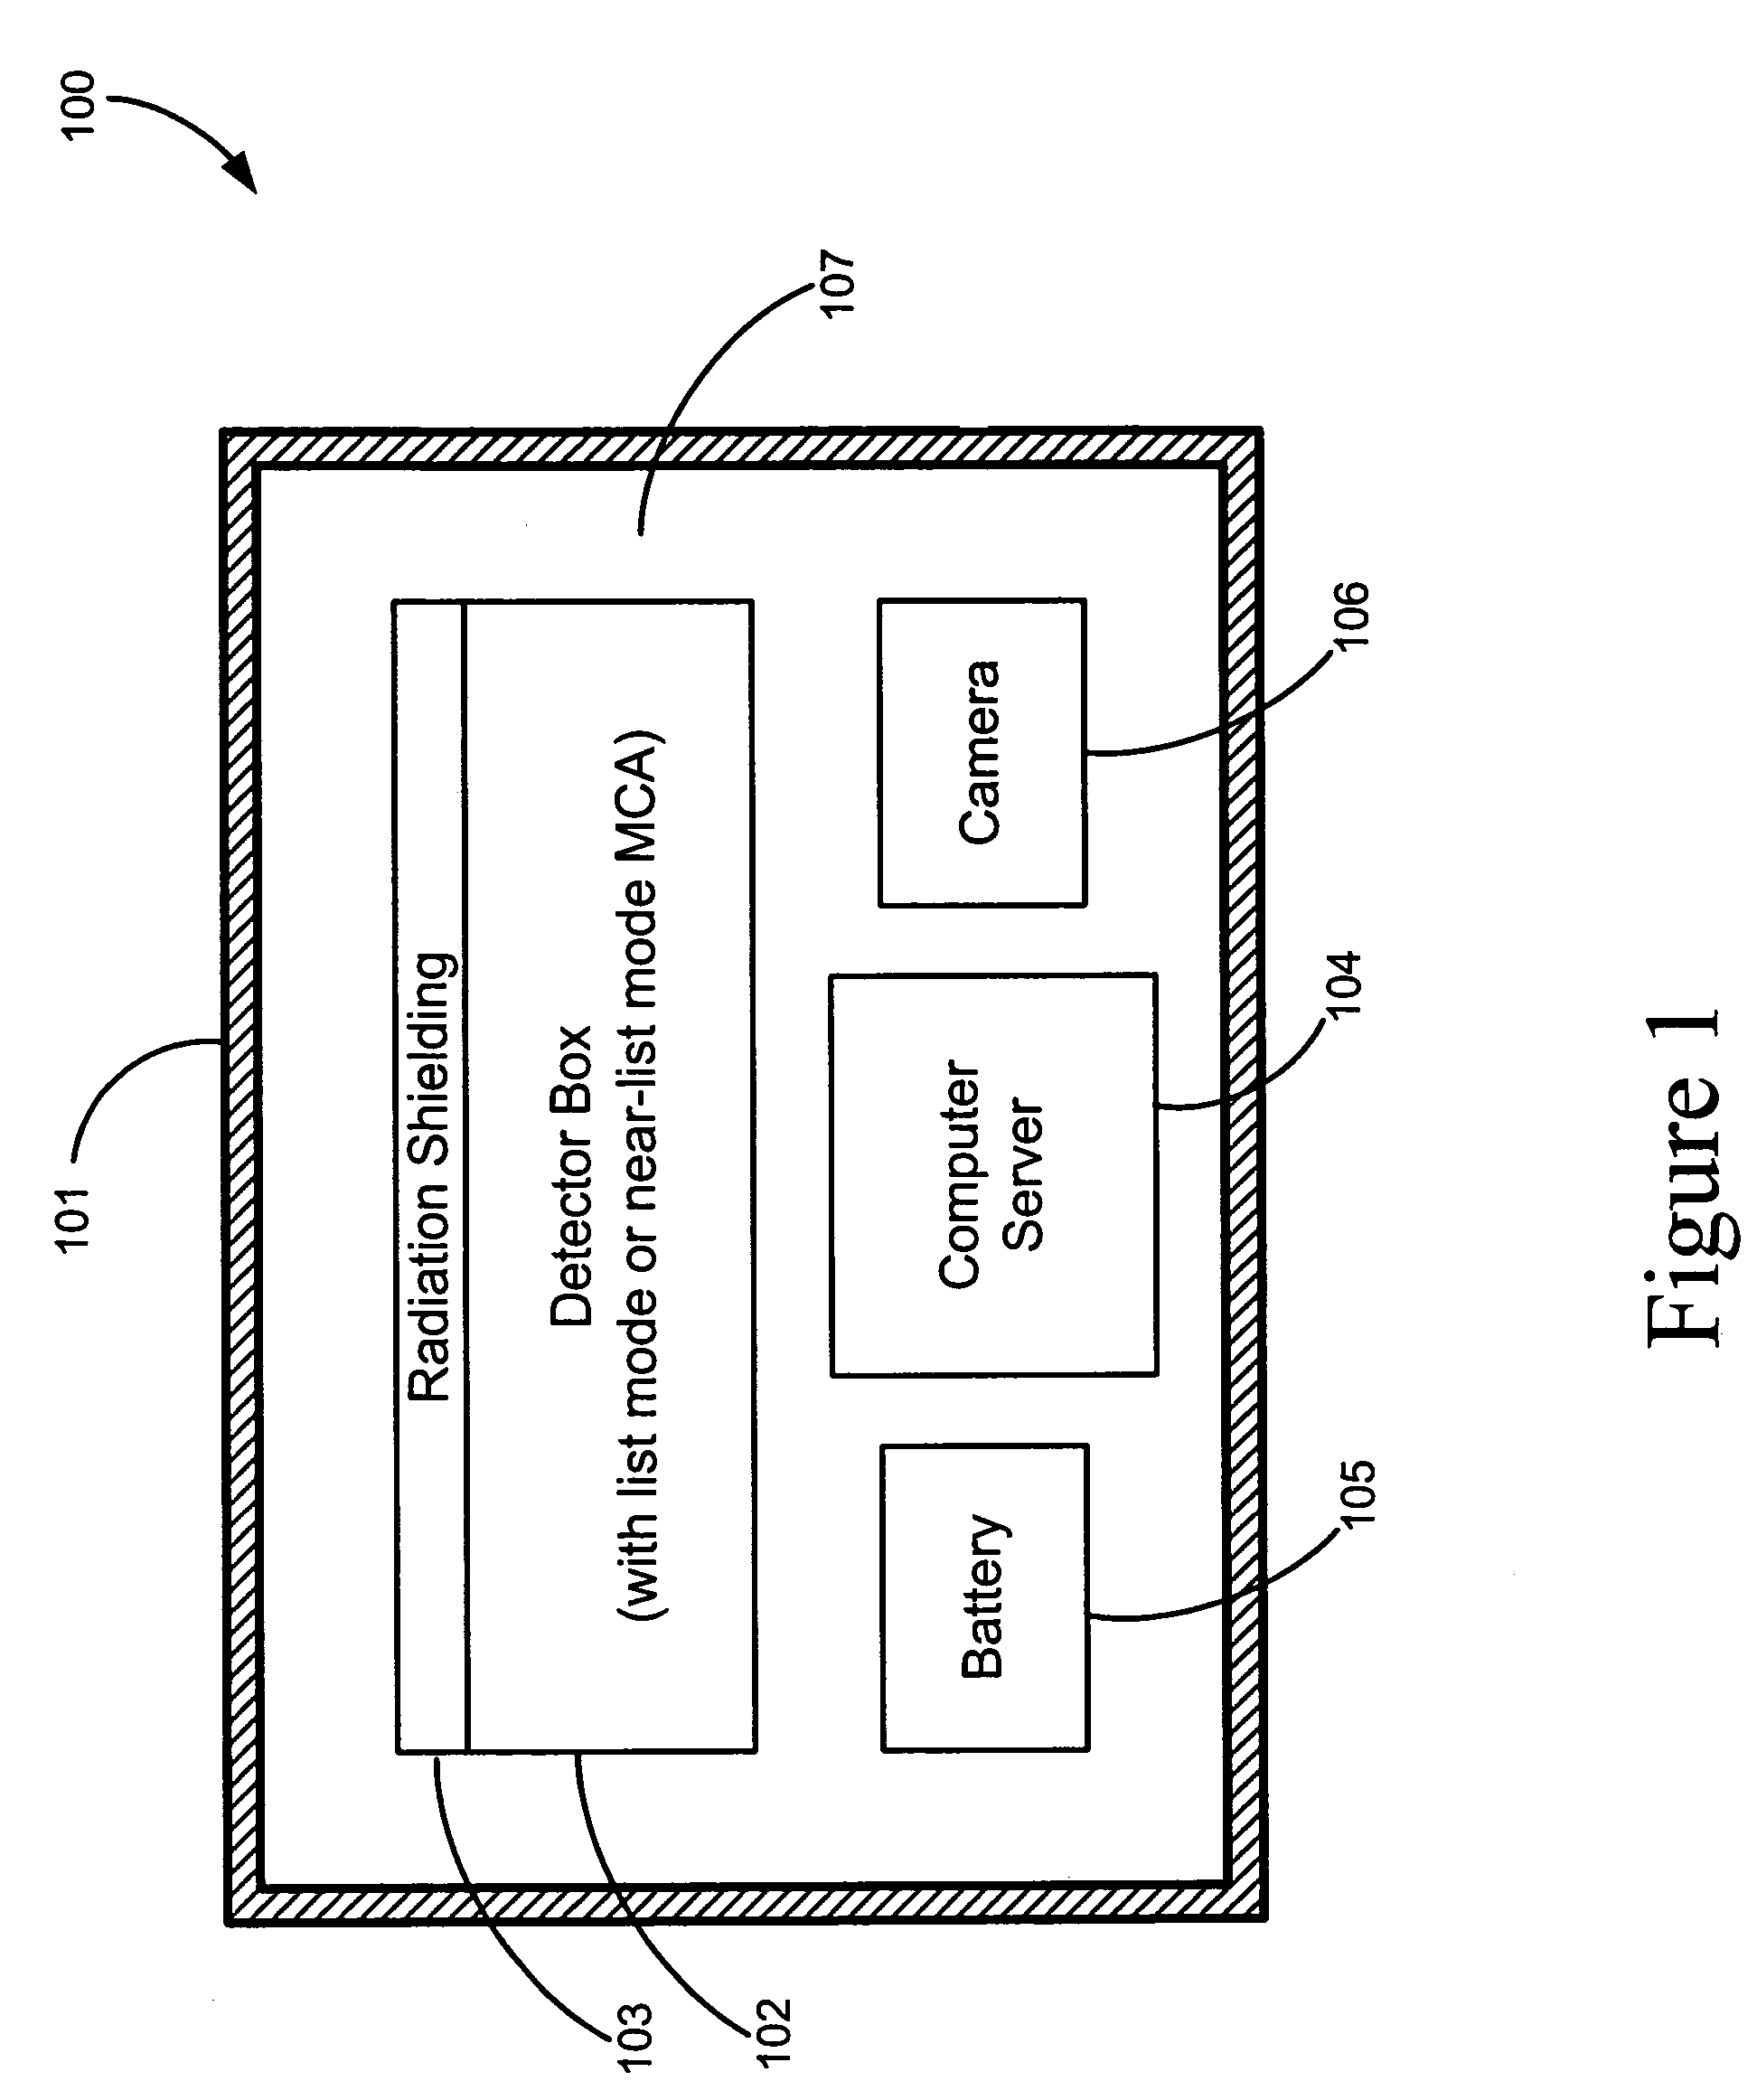 Adaptable radiation monitoring system and method